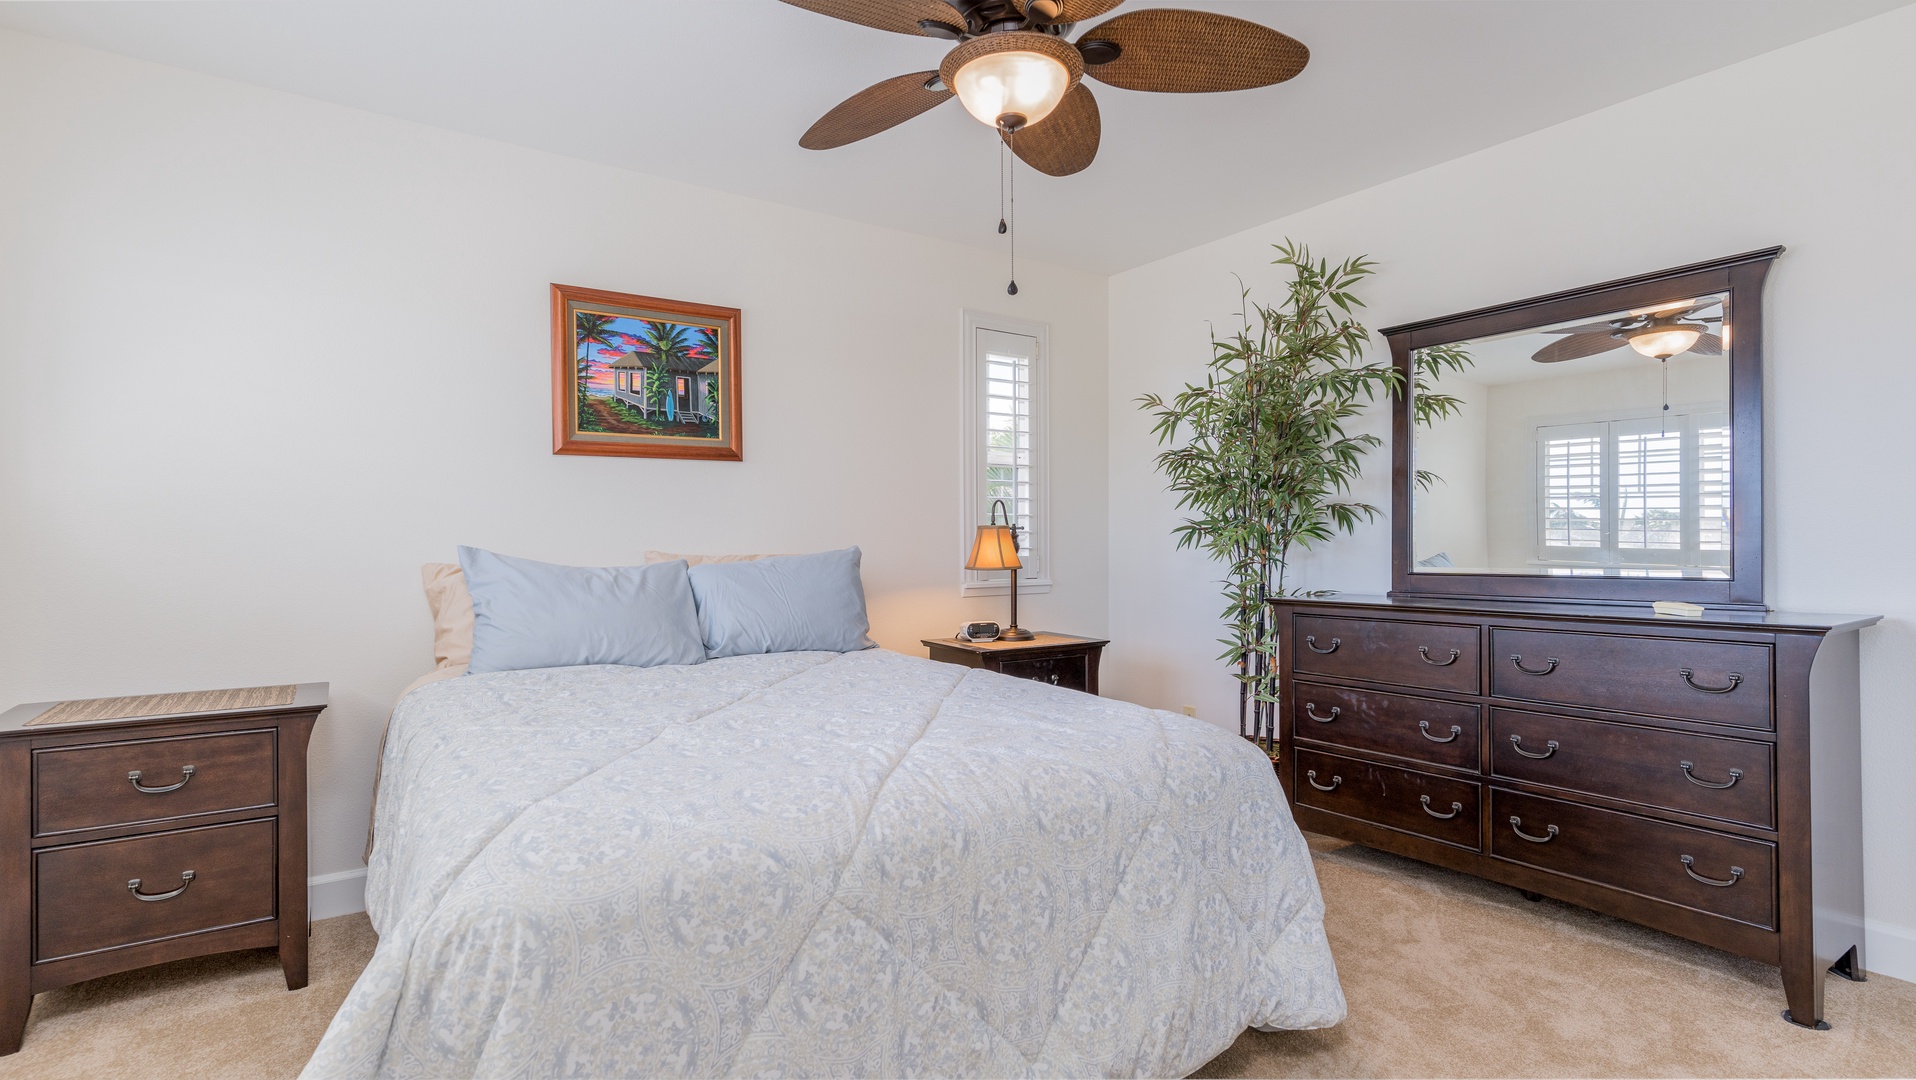 Kapolei Vacation Rentals, Ko Olina Kai 1057B - The second guest bedroom had a dresser and TV.